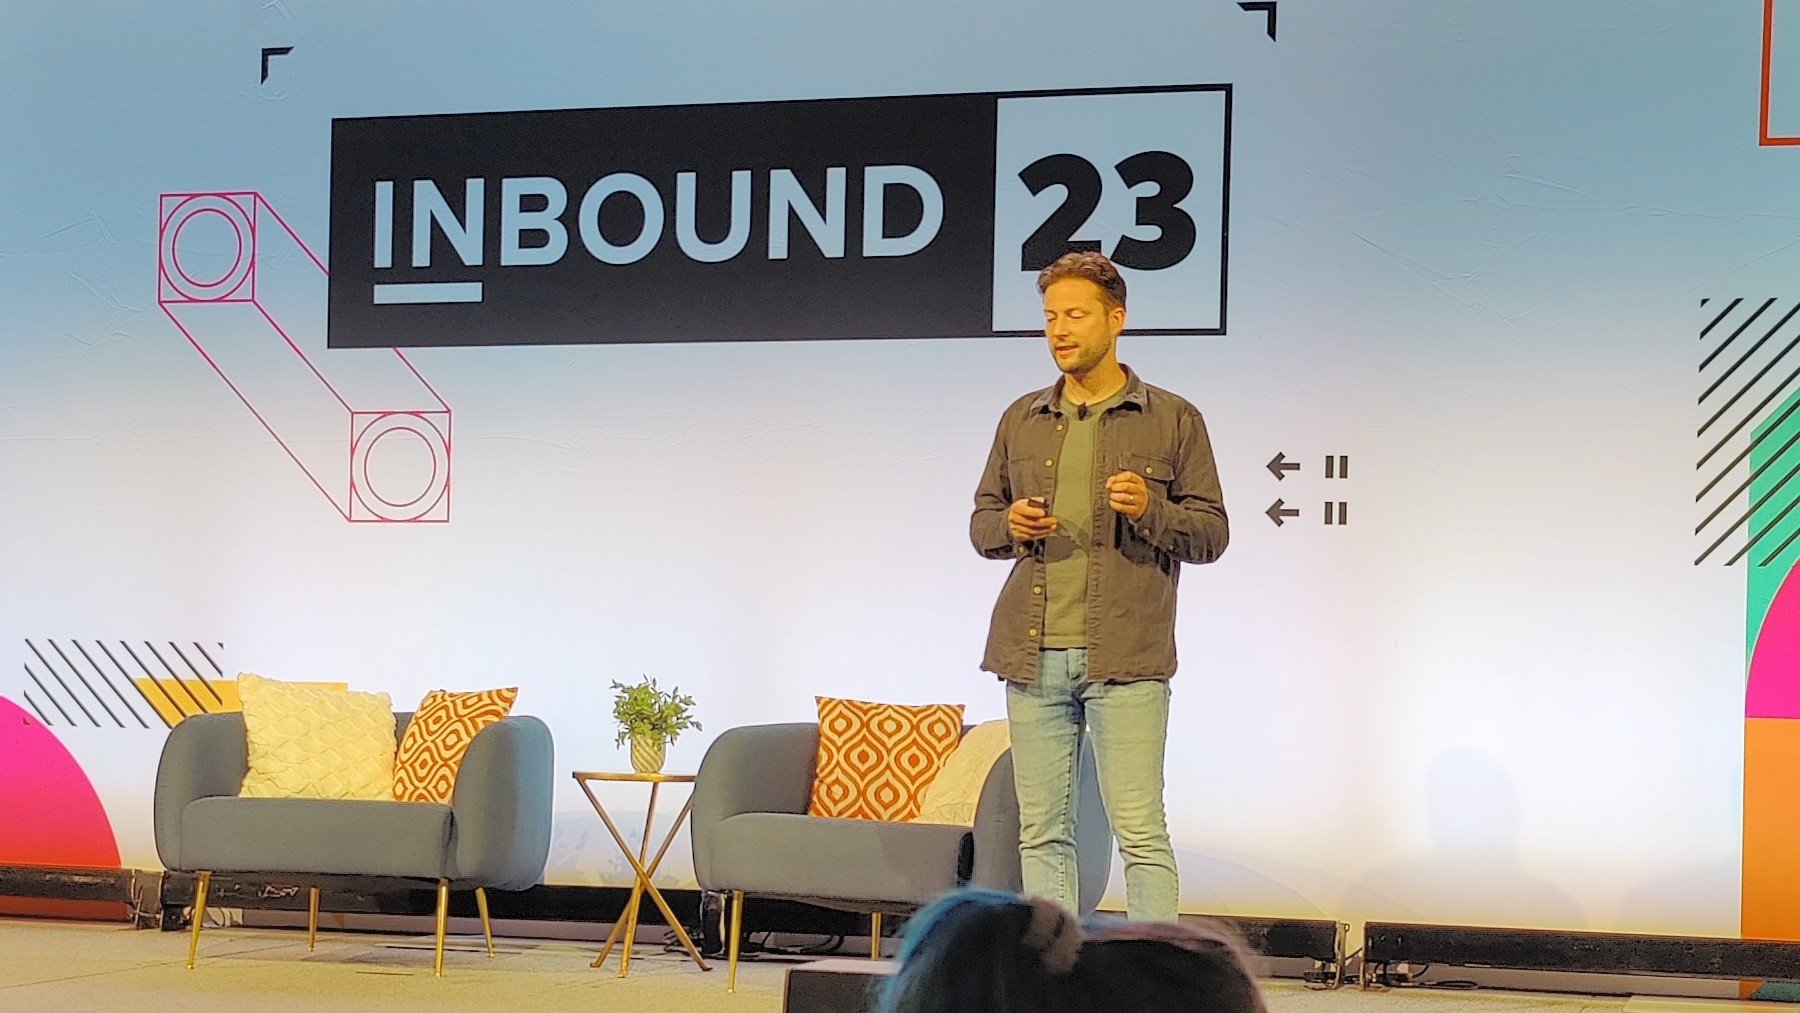 Andy Pitre shares product updates at #INBOUND23